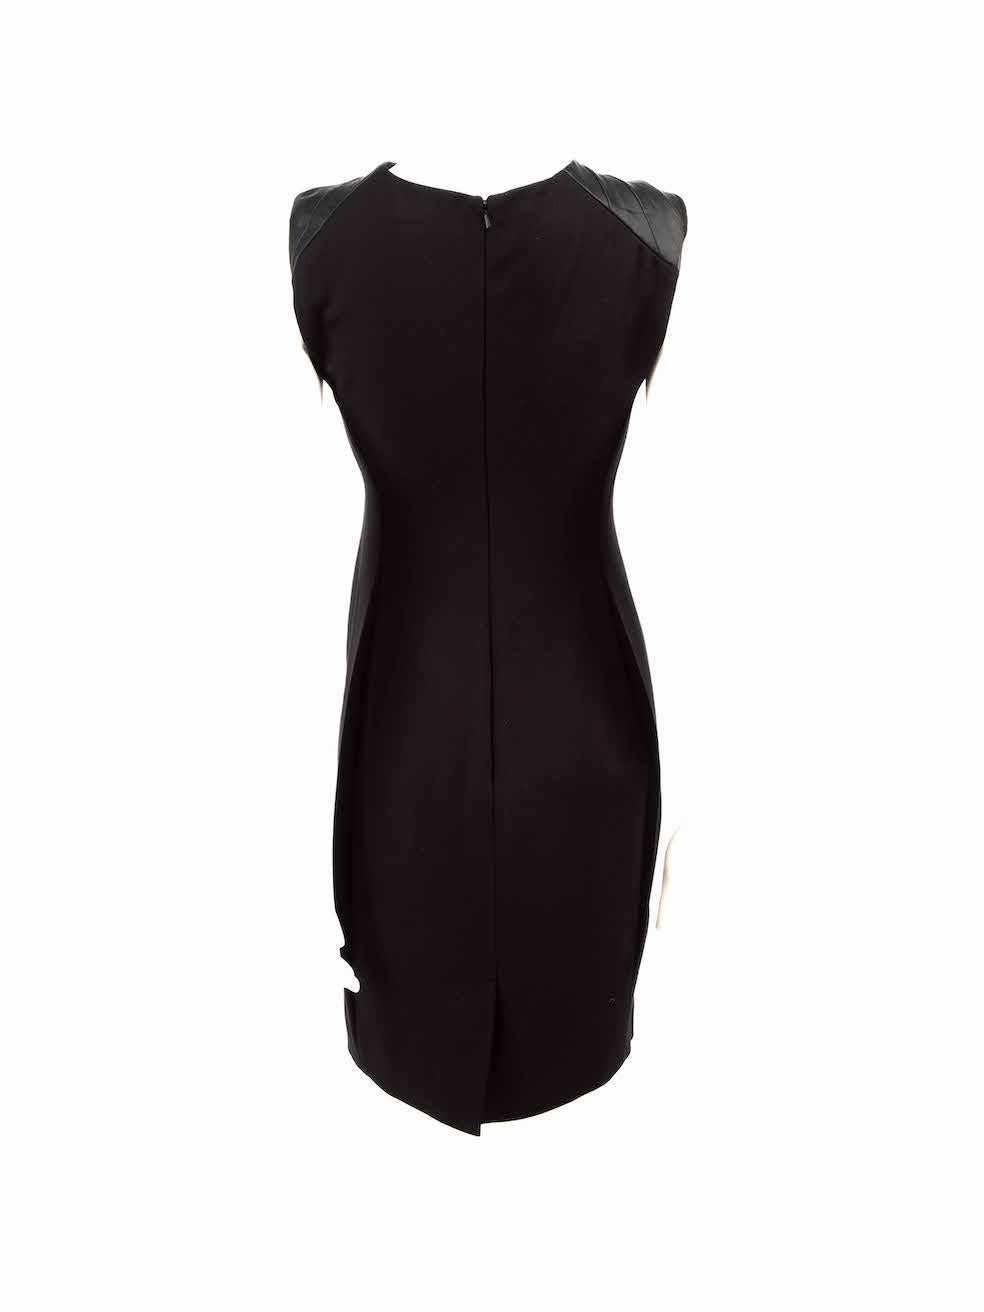 Halston Heritage Black Knee Length Sleeveless Dress Size S In Excellent Condition For Sale In London, GB